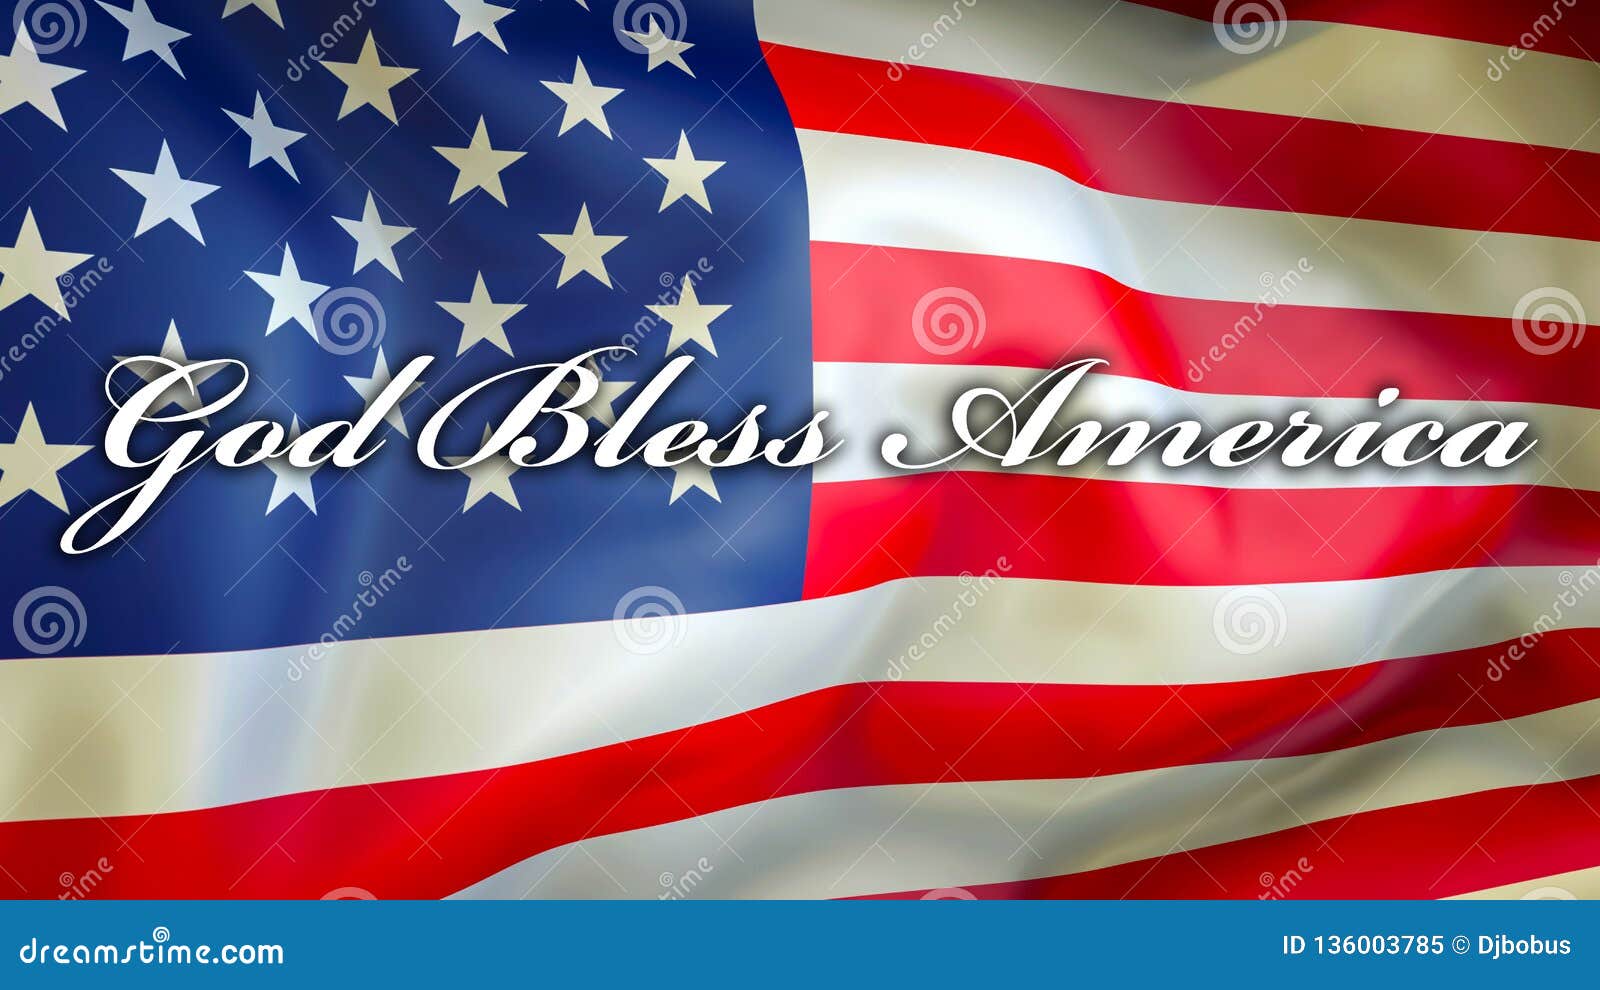 God Bless America on a USA Flag Background, 3D Rendering. United States of  America Flag Waving in the Wind Stock Illustration - Illustration of  rendering, country: 136003785